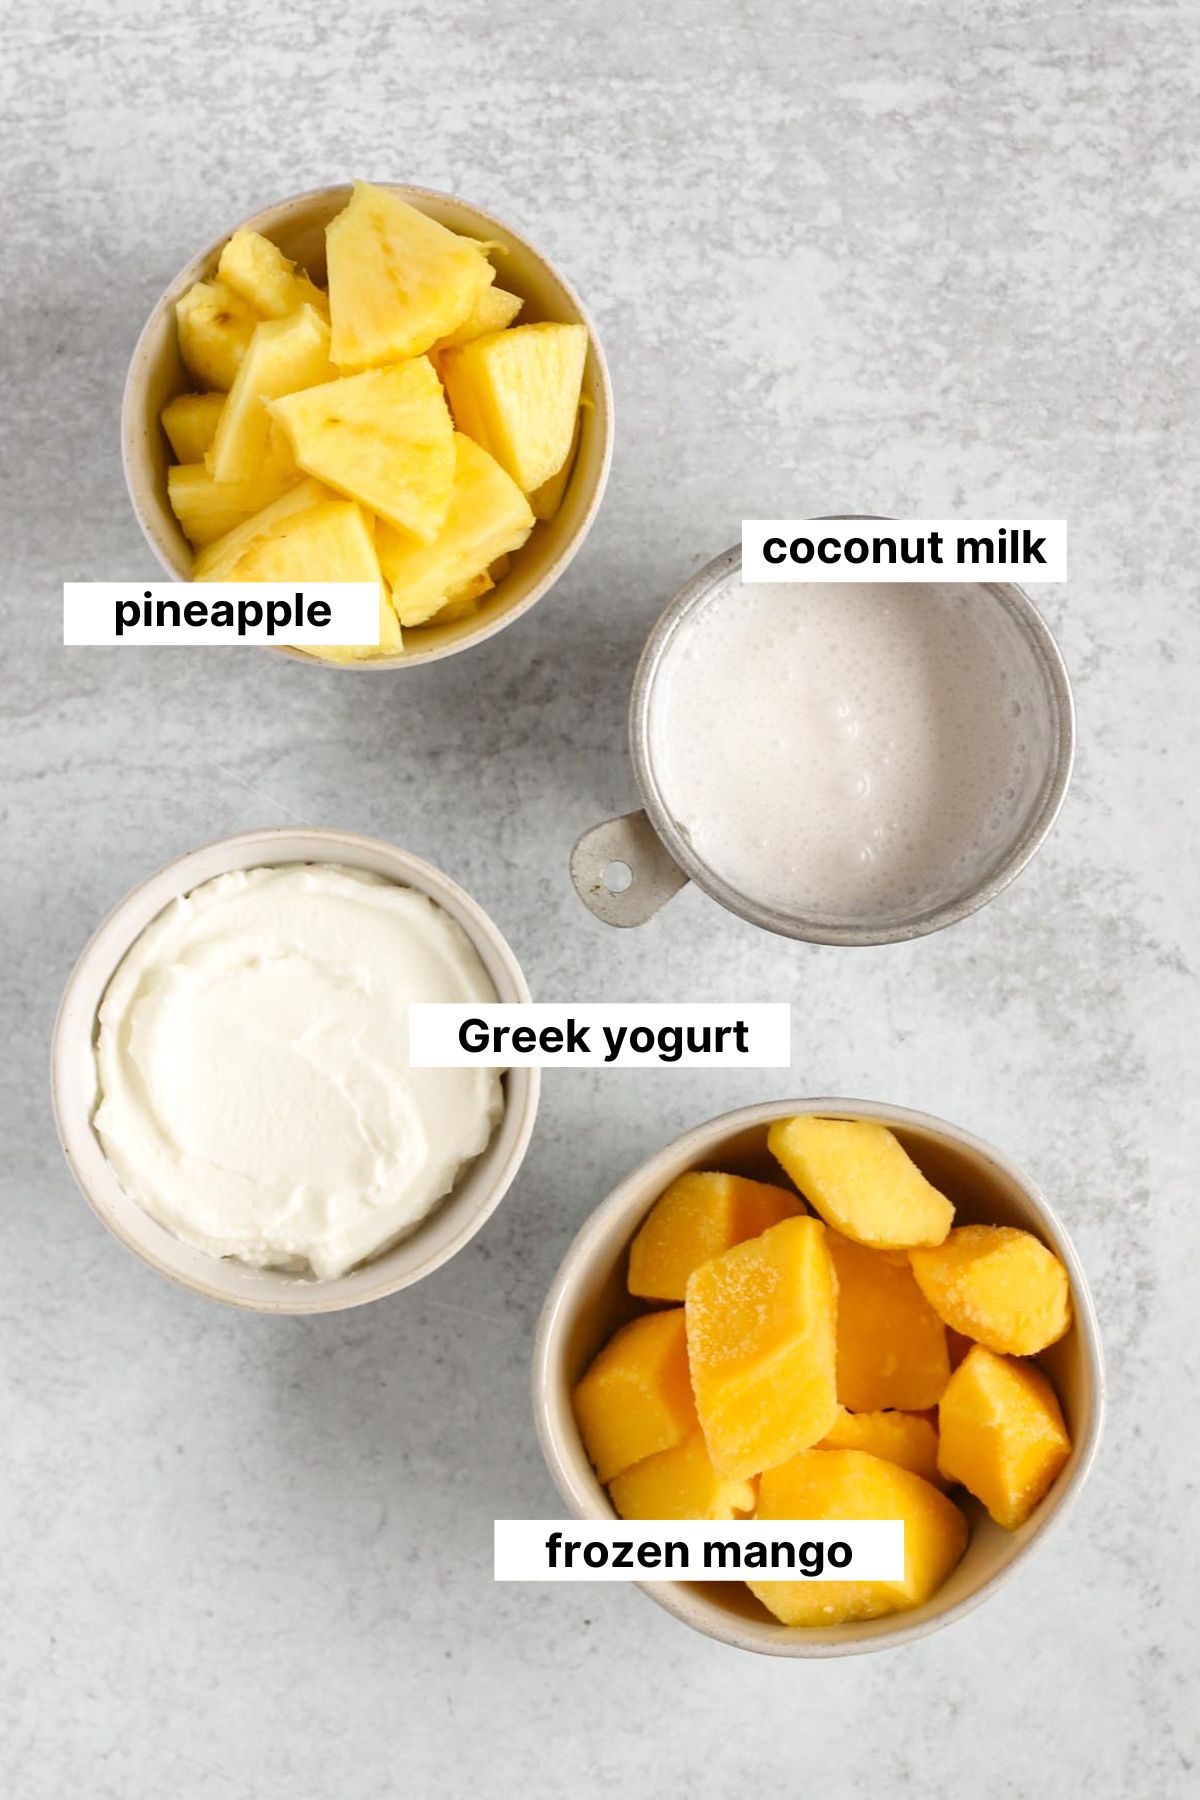 Labeled ingredients needed for mango pineapple smoothie.